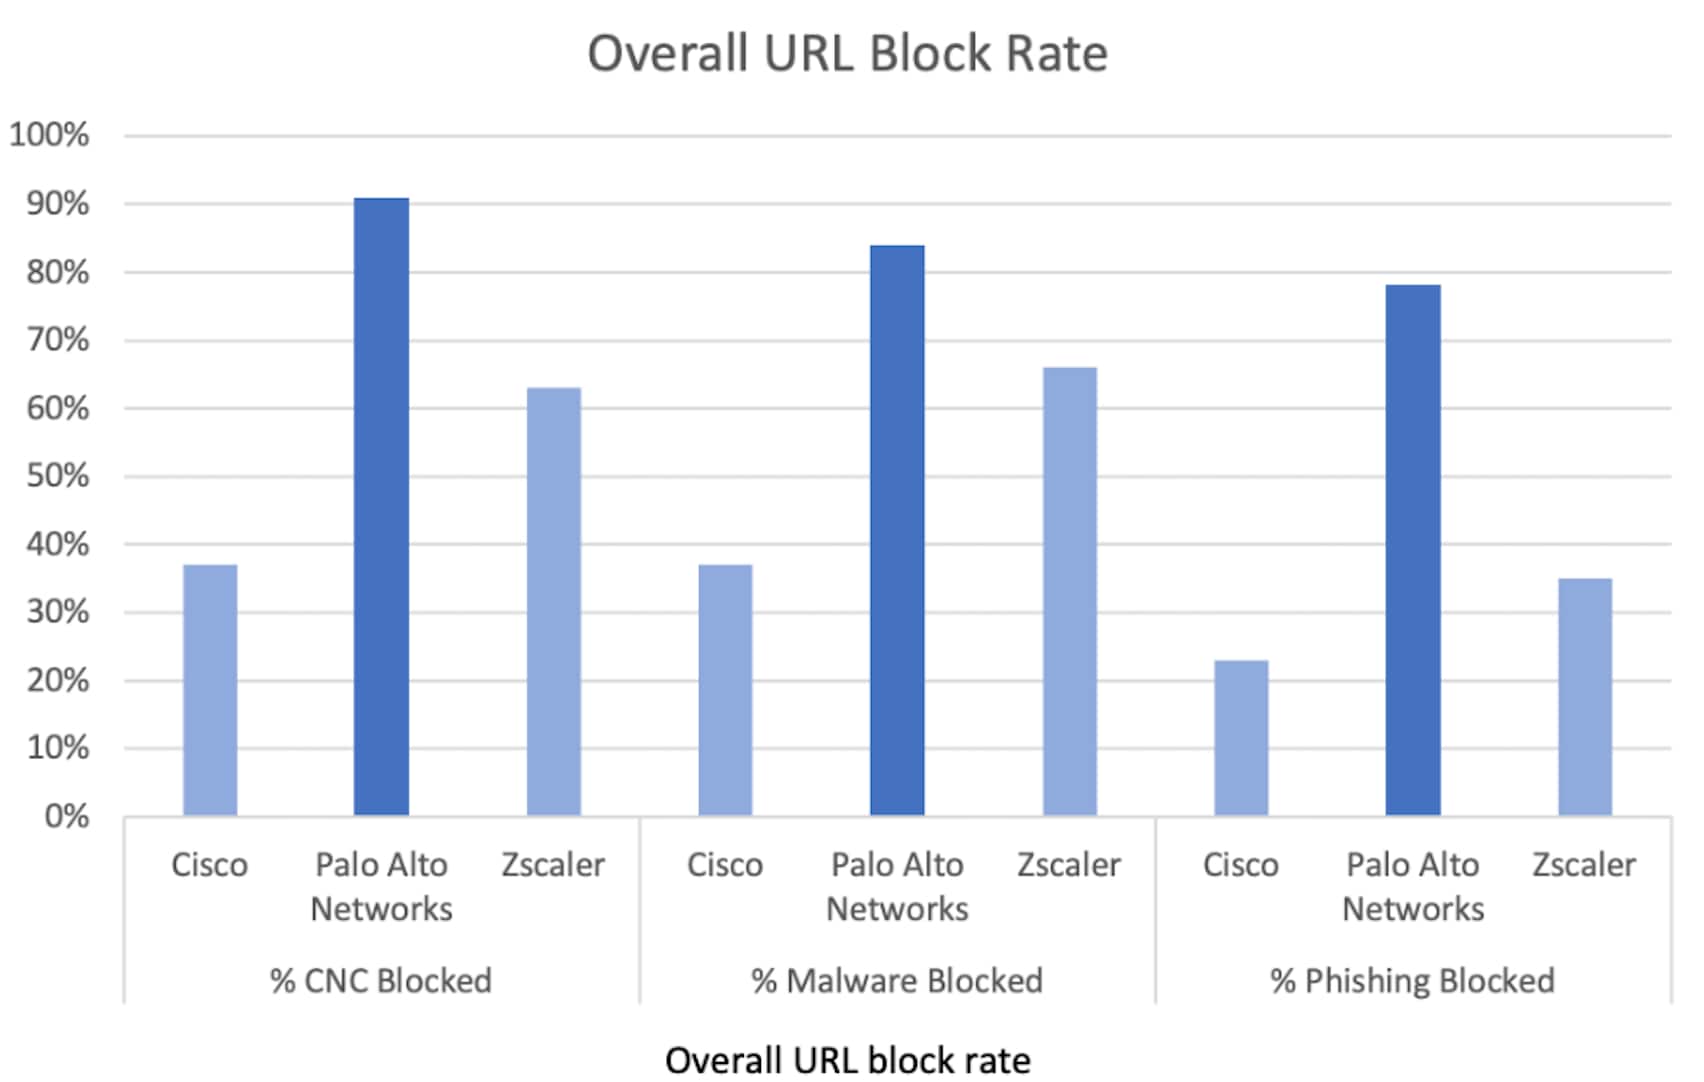 Overall URL Block Rate